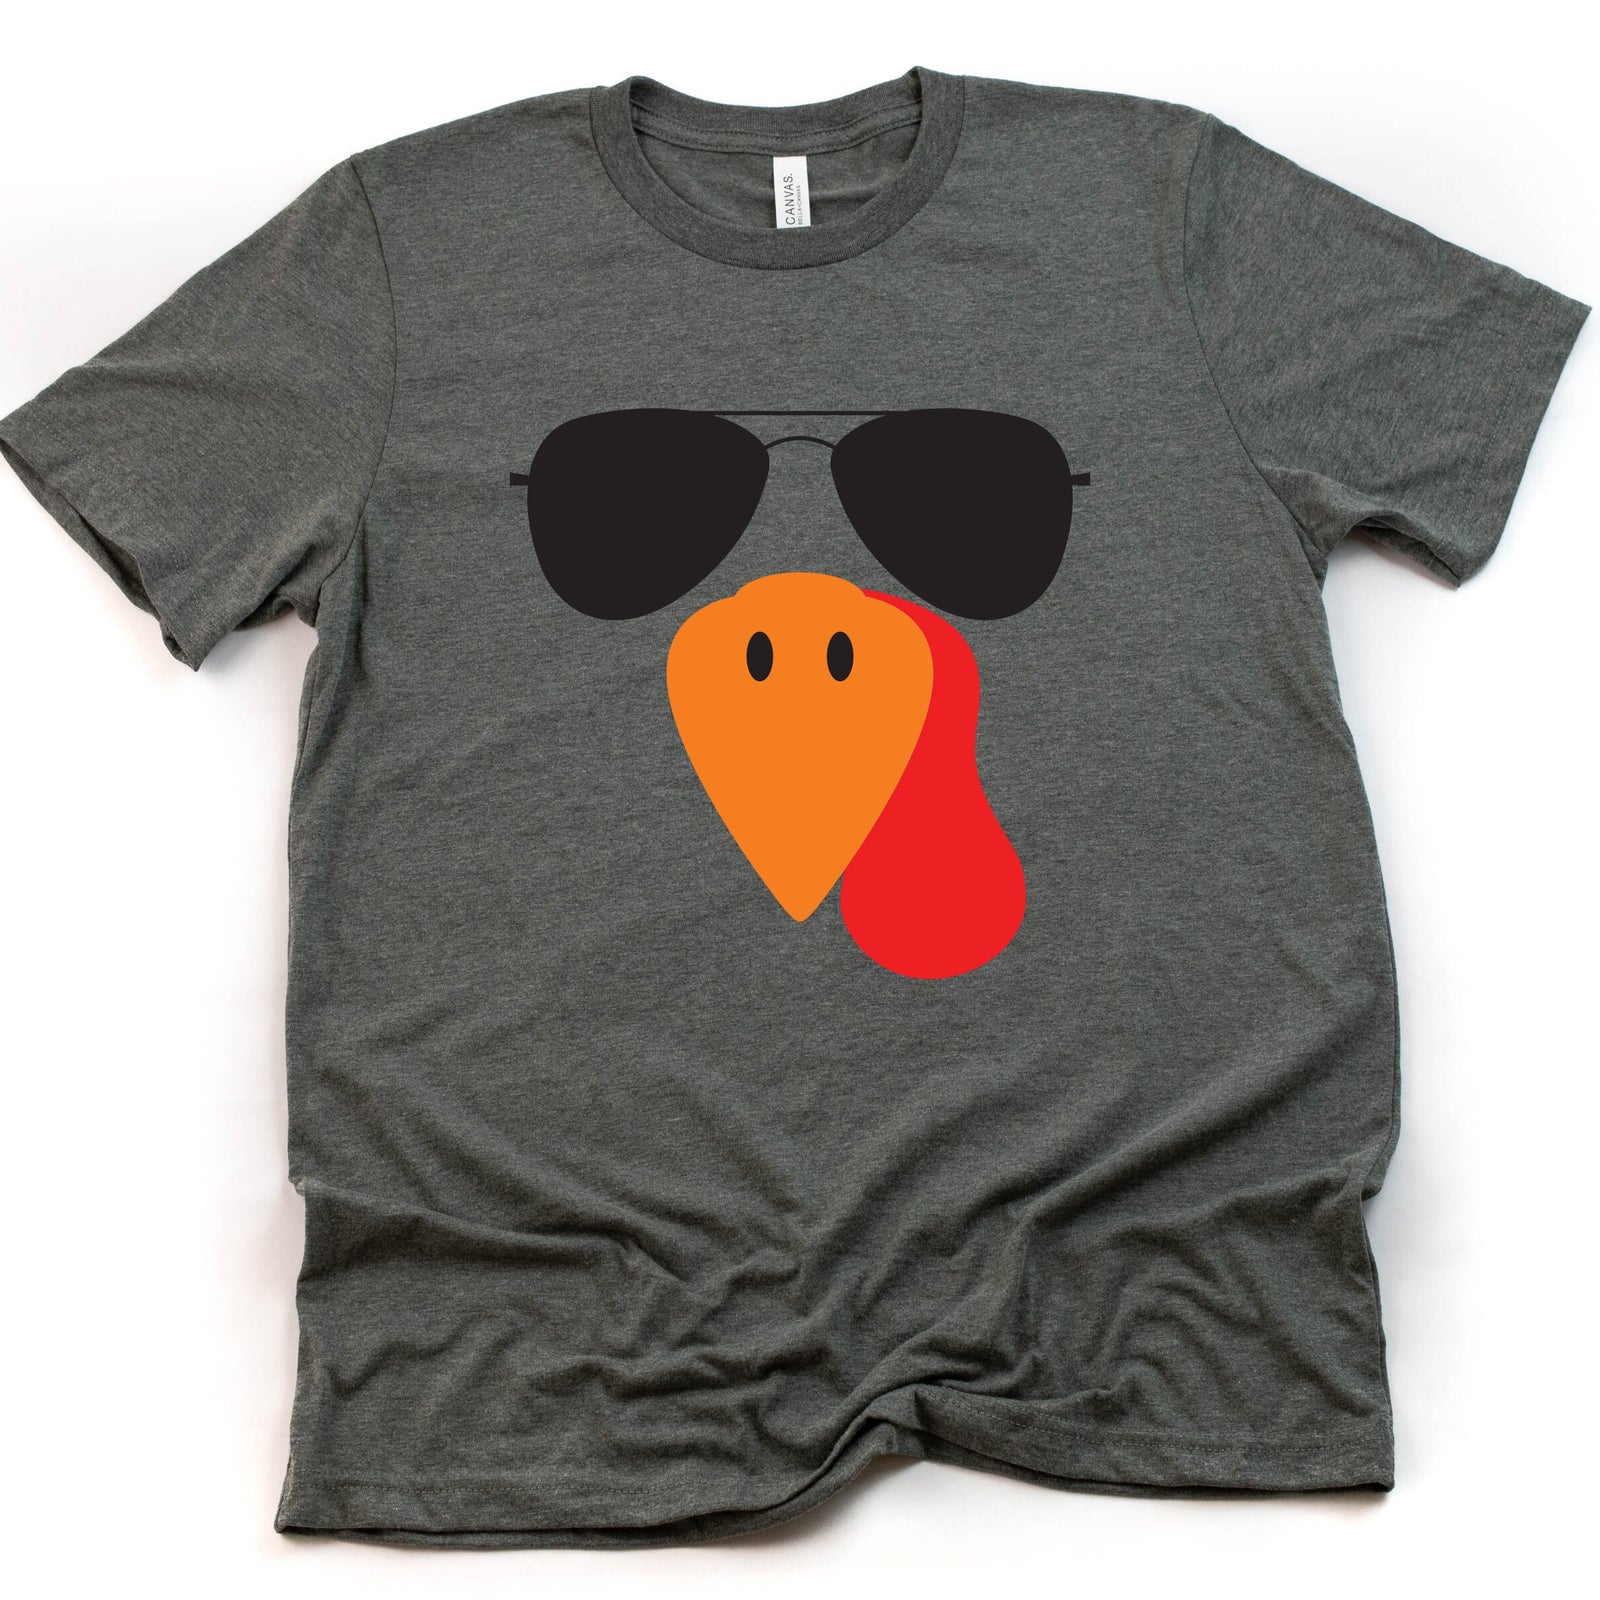 Cool Turkey Adult T Shirt - Happy Thanksgiving - Sunglasses - Gobble Gobble - Family Matching